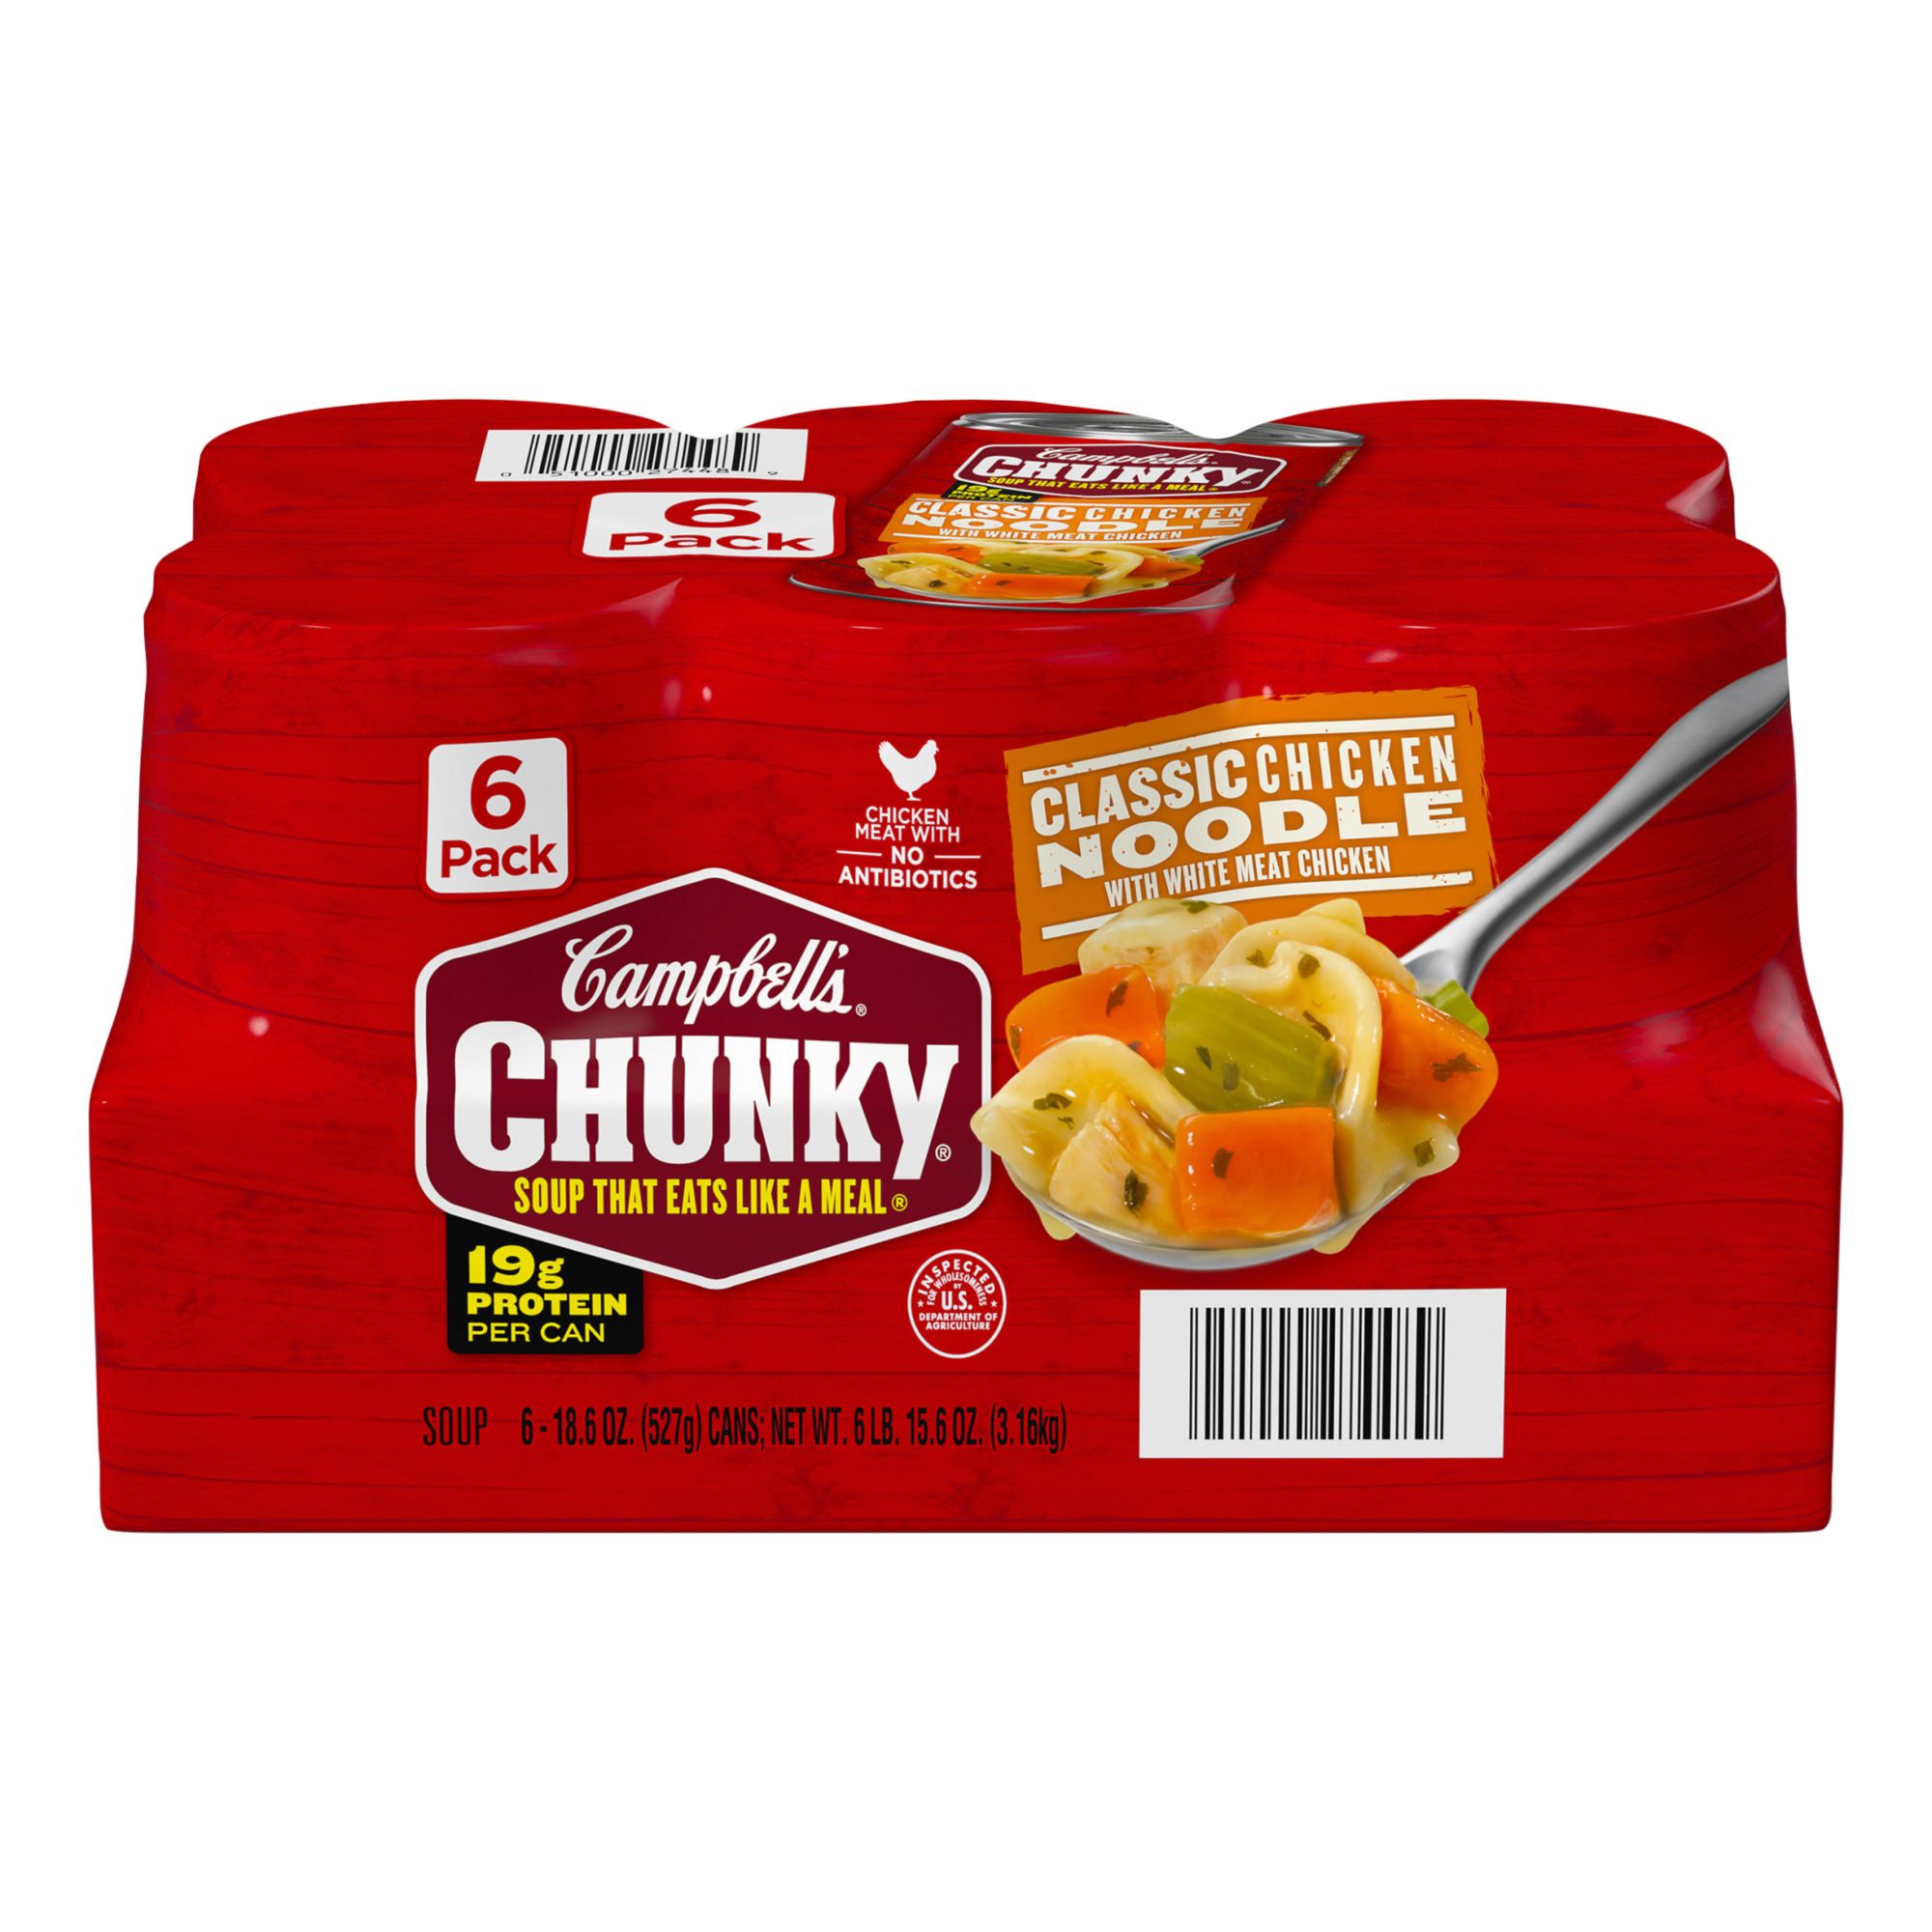 Healthy Choice Chicken Noodle Canned Soup, 15 OZ